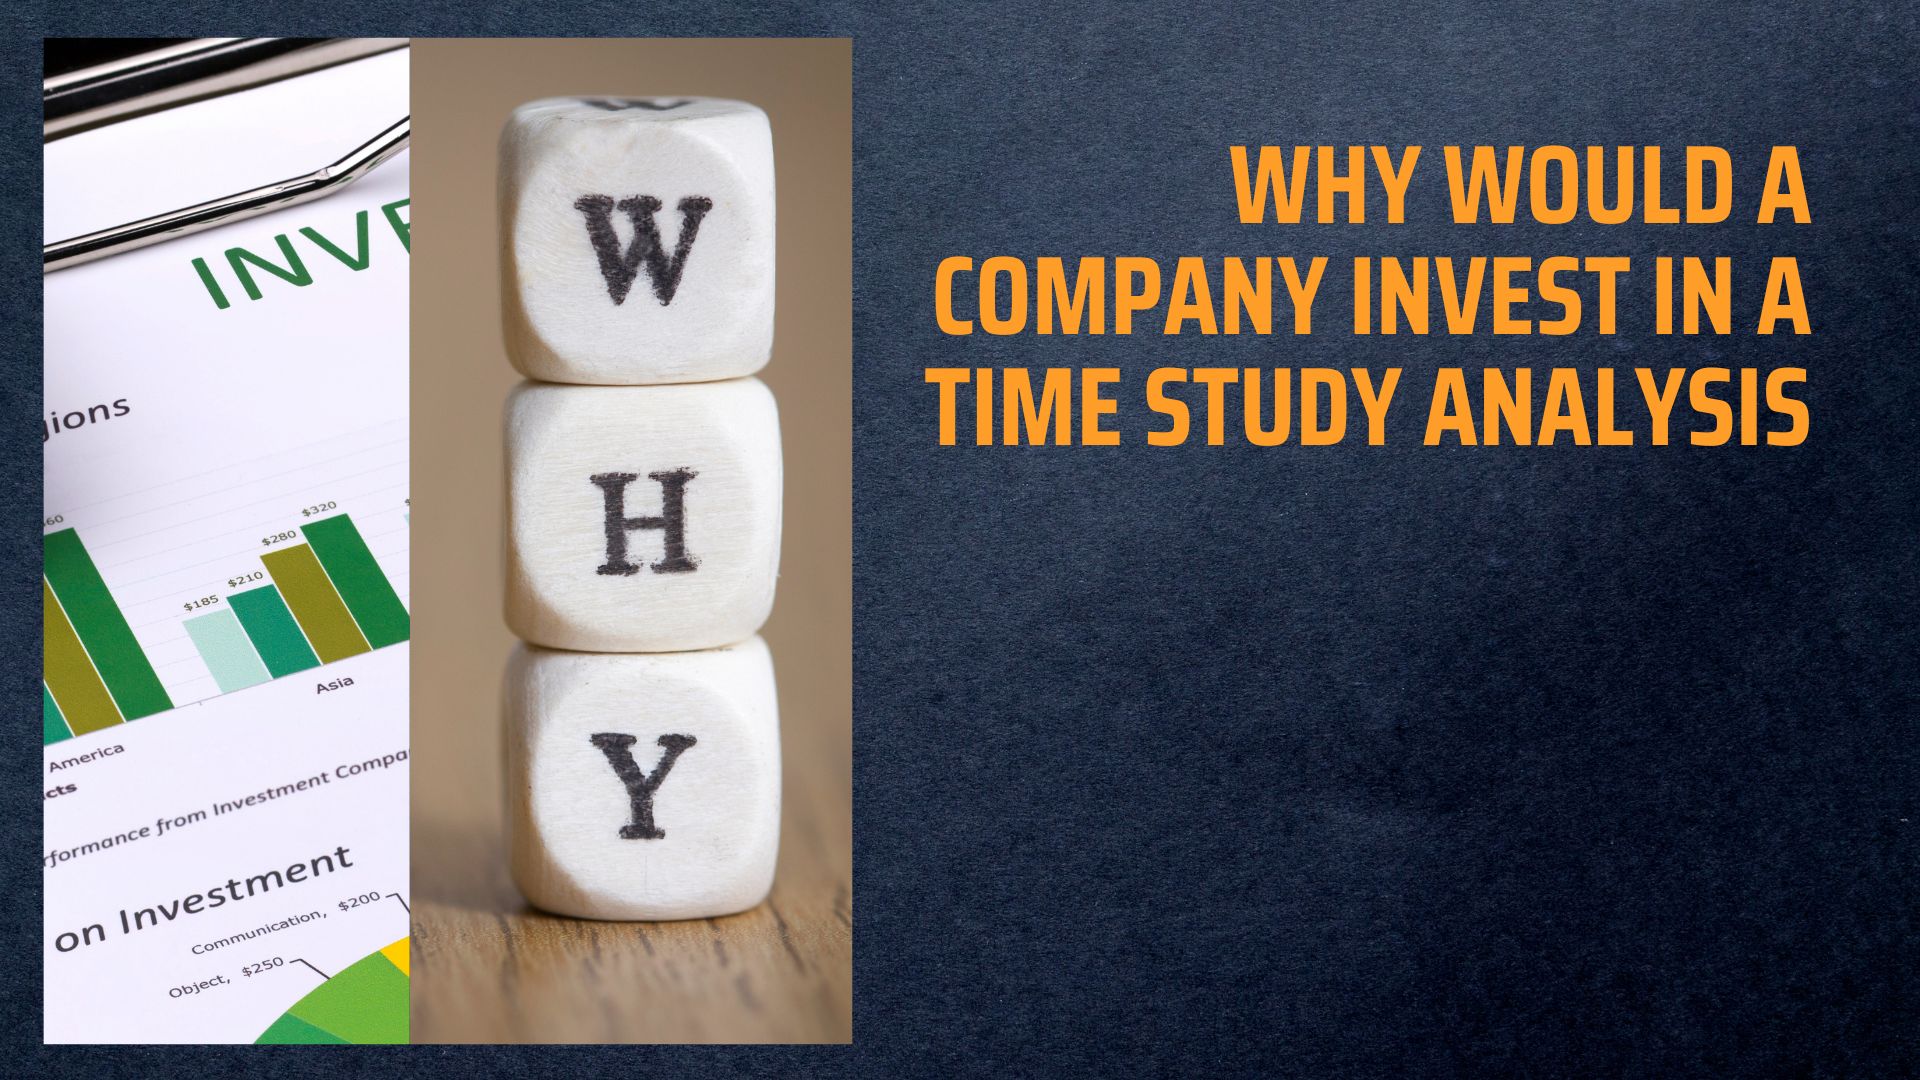 Why Would a Company Invest in a Time Study Analysis